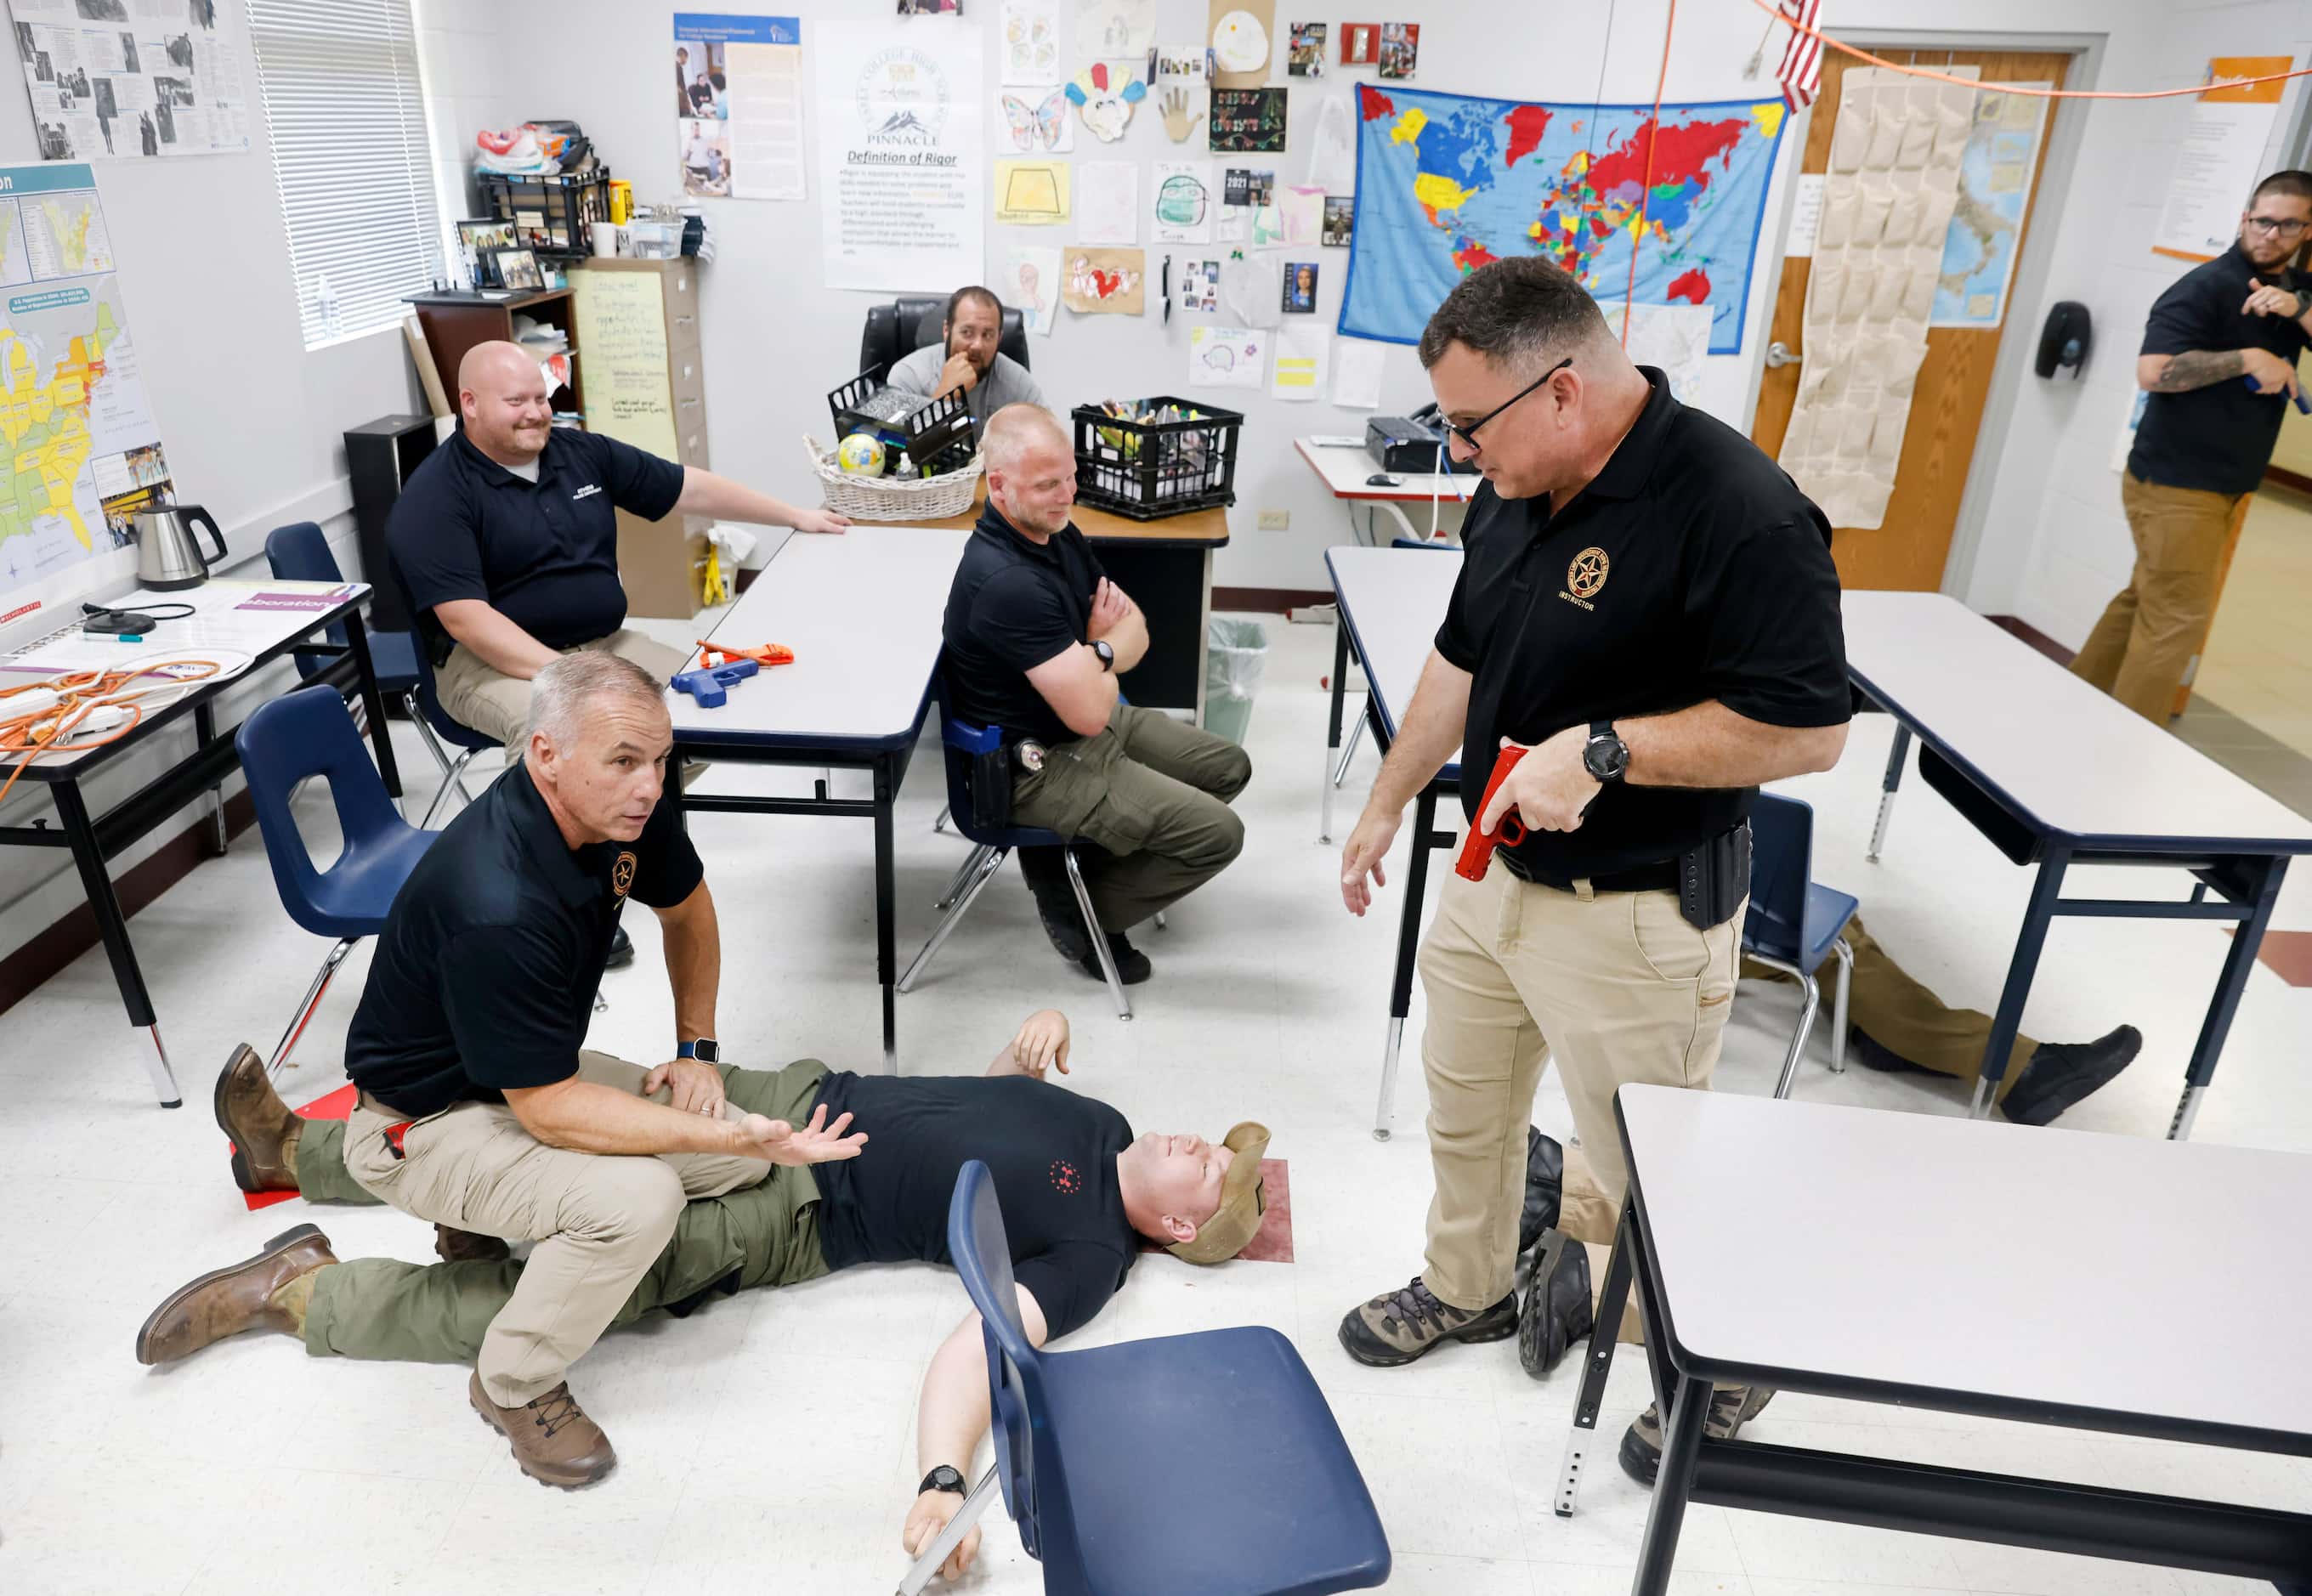 In case one doesn’t have a tourniquet, Advanced Law Enforcement Rapid Response Training...